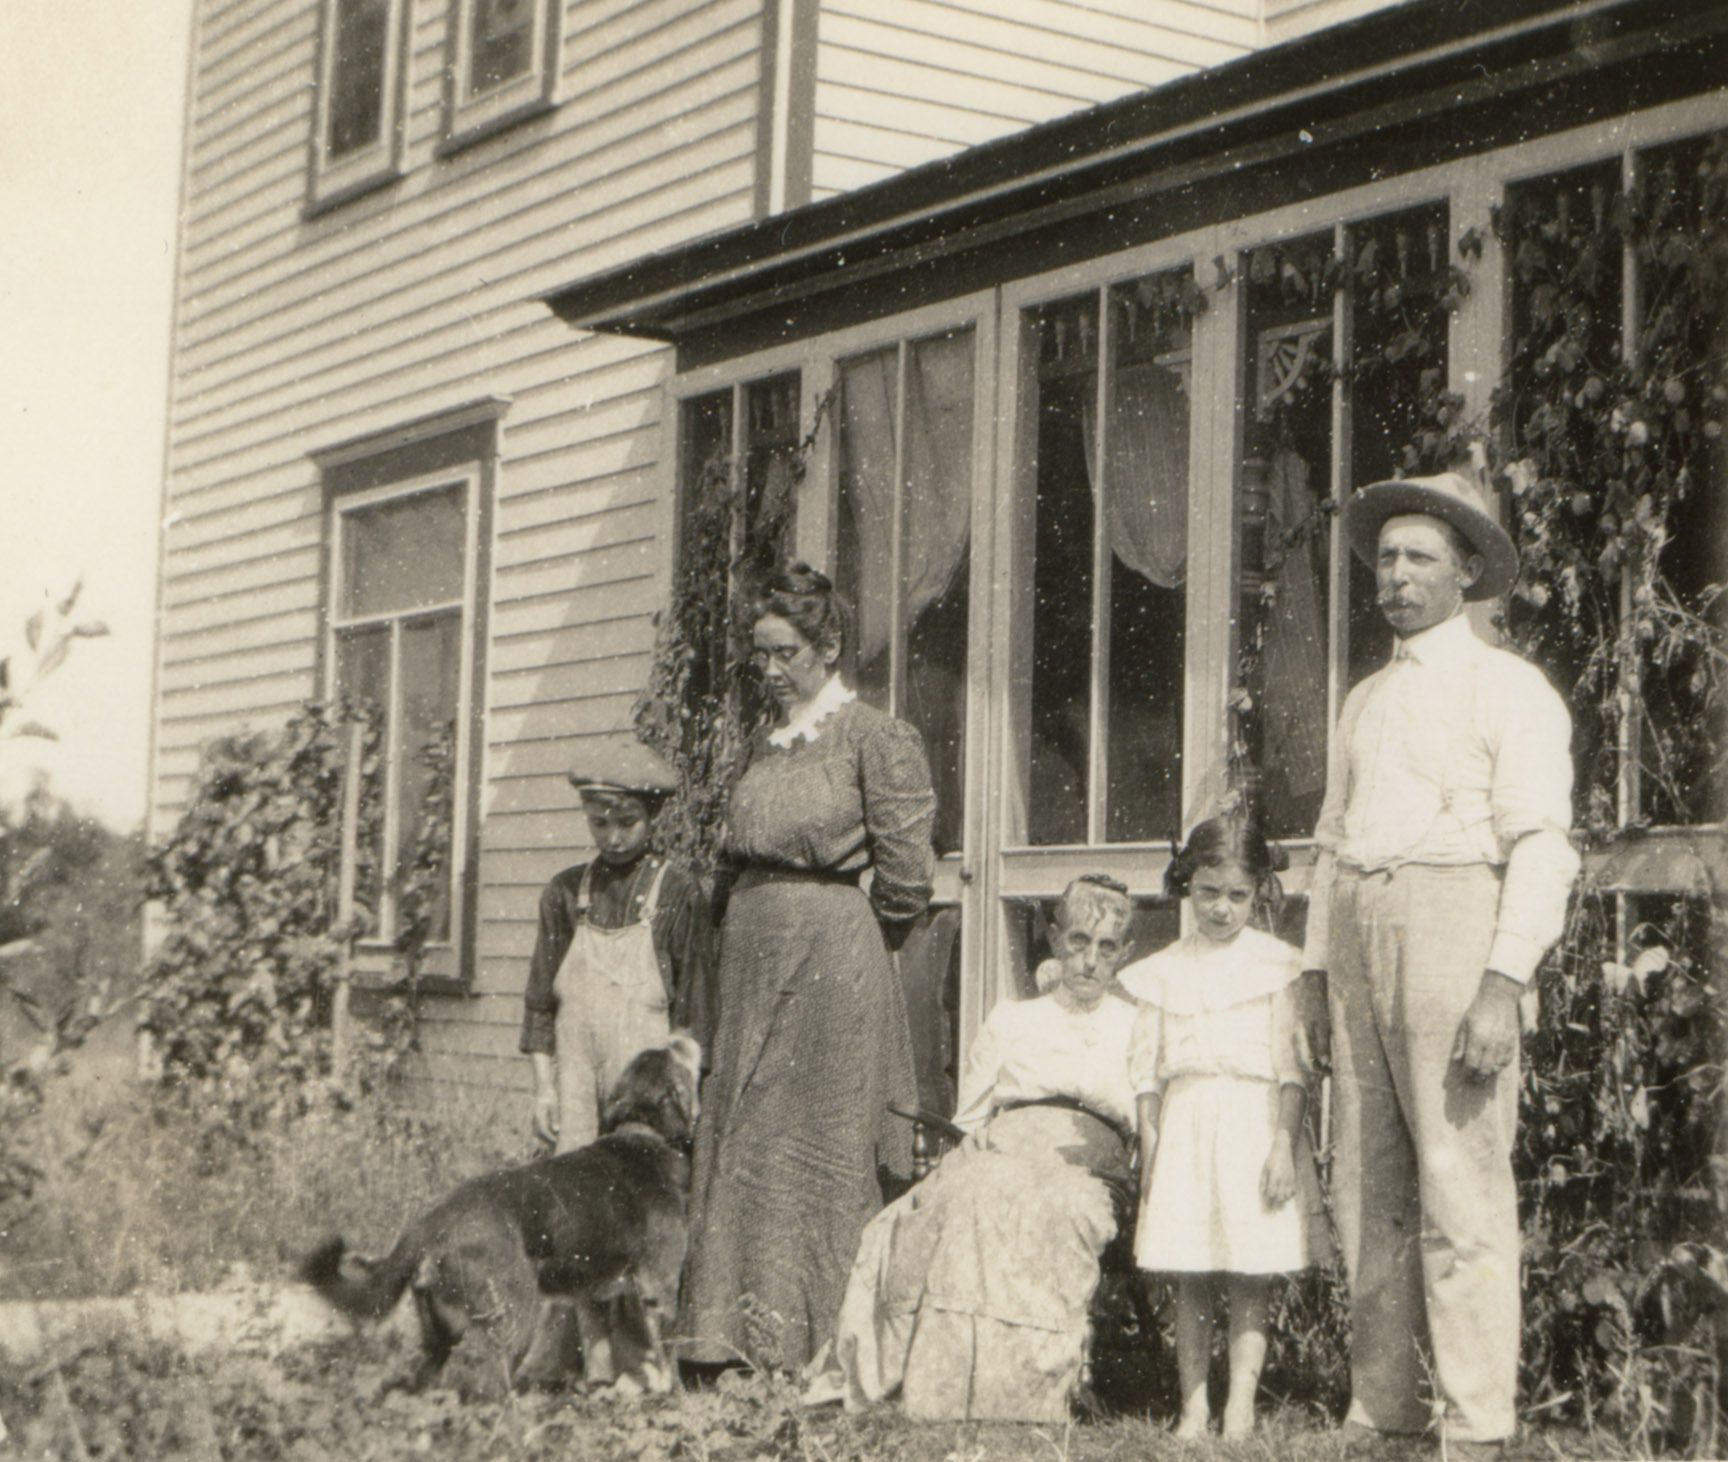 The Will and Myra Gowen Family. The woman sitting is Will's mother Maria. About 1907.